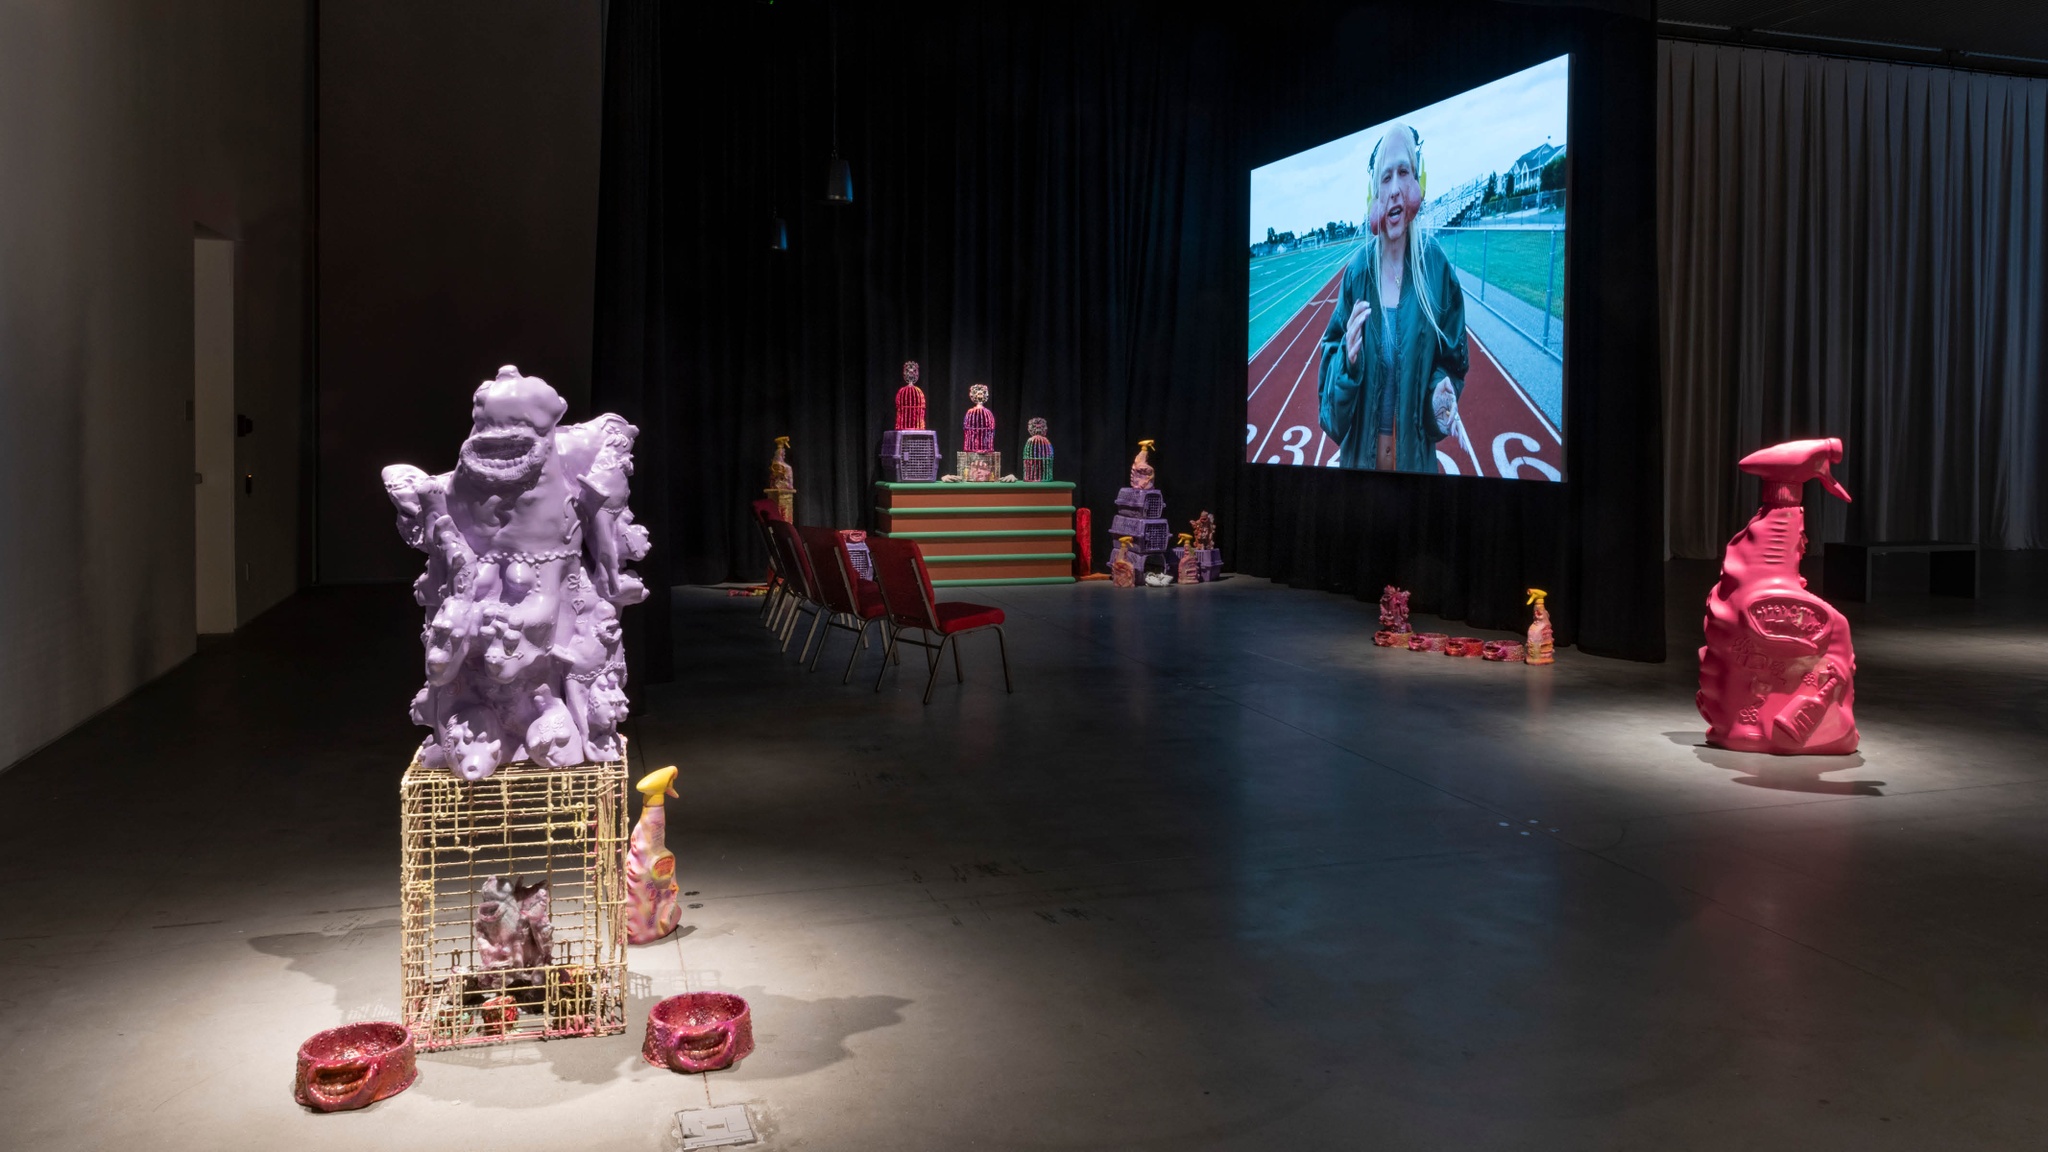 An installation of sculptural objects and a film in a gallery with low light. The sculptural objects are oversized versions of pet products, like cages, dog bowls, and cleaning supplies. They are cast in fluorescent colors. In the foreground is a large pink spray bottle sculpture, about four feet tall. In the background, the film projected on a screen shows the artist Jake Brush in character with a long blond wig and prosthetic jowls protruding from his cheeks while he walks on a high school track.